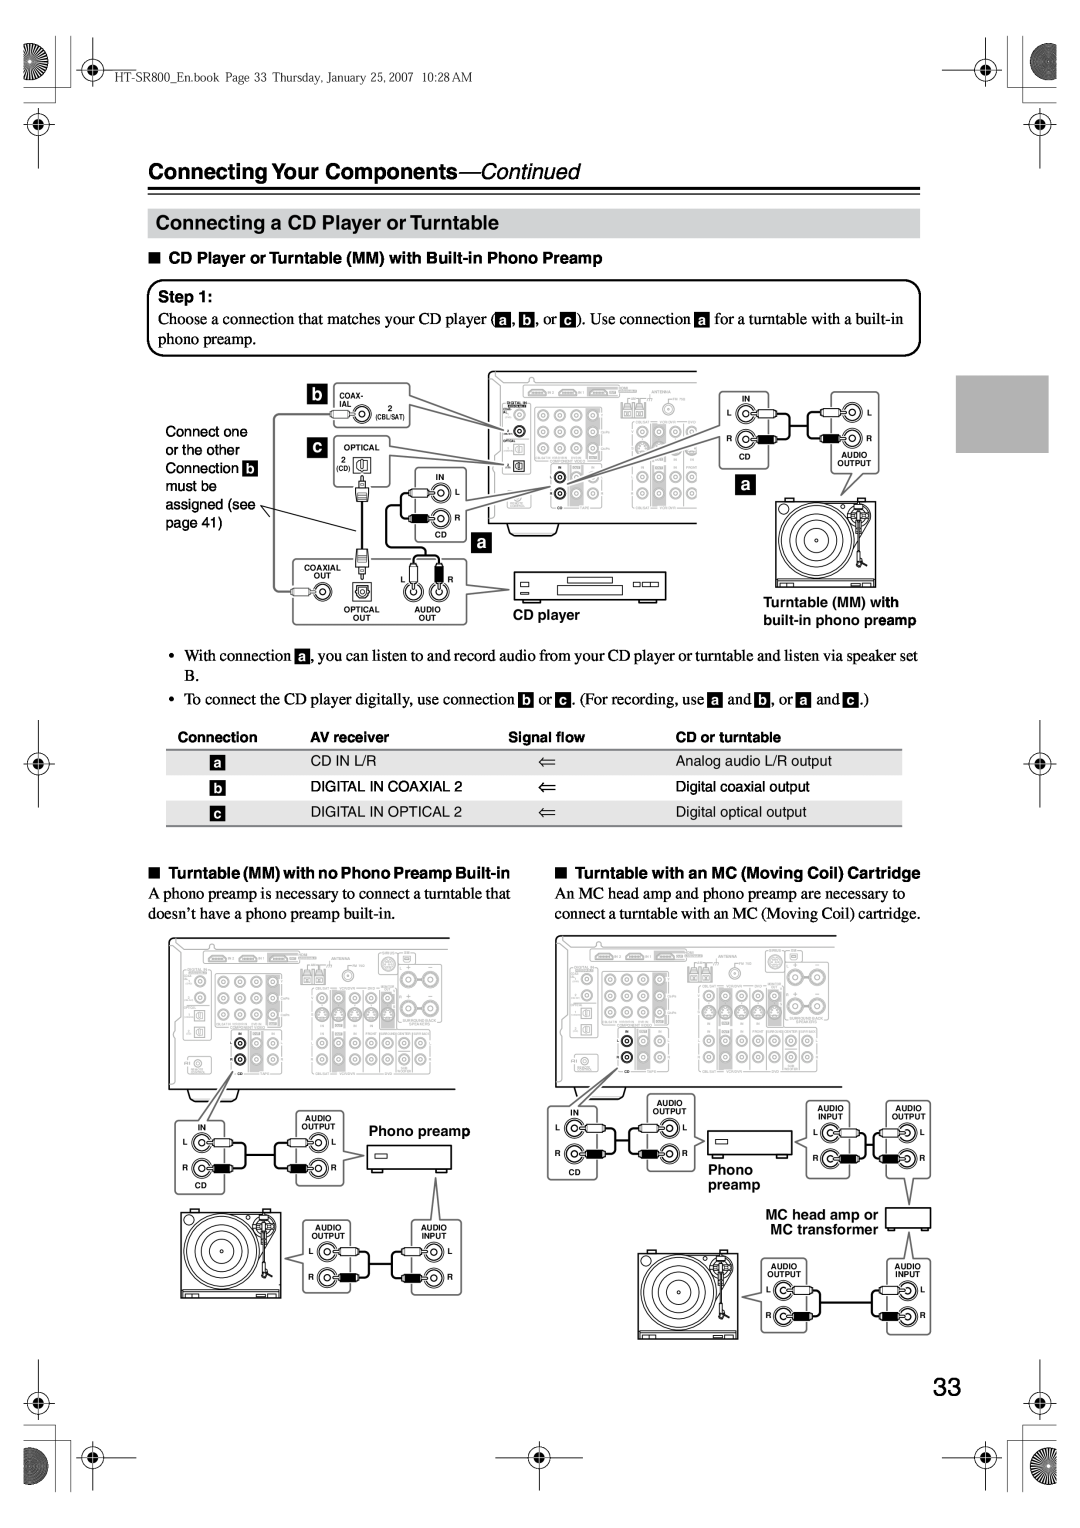 Onkyo HT-SR800 instruction manual Connecting a CD Player or Turntable, Connecting Your Components-Continued, Step 